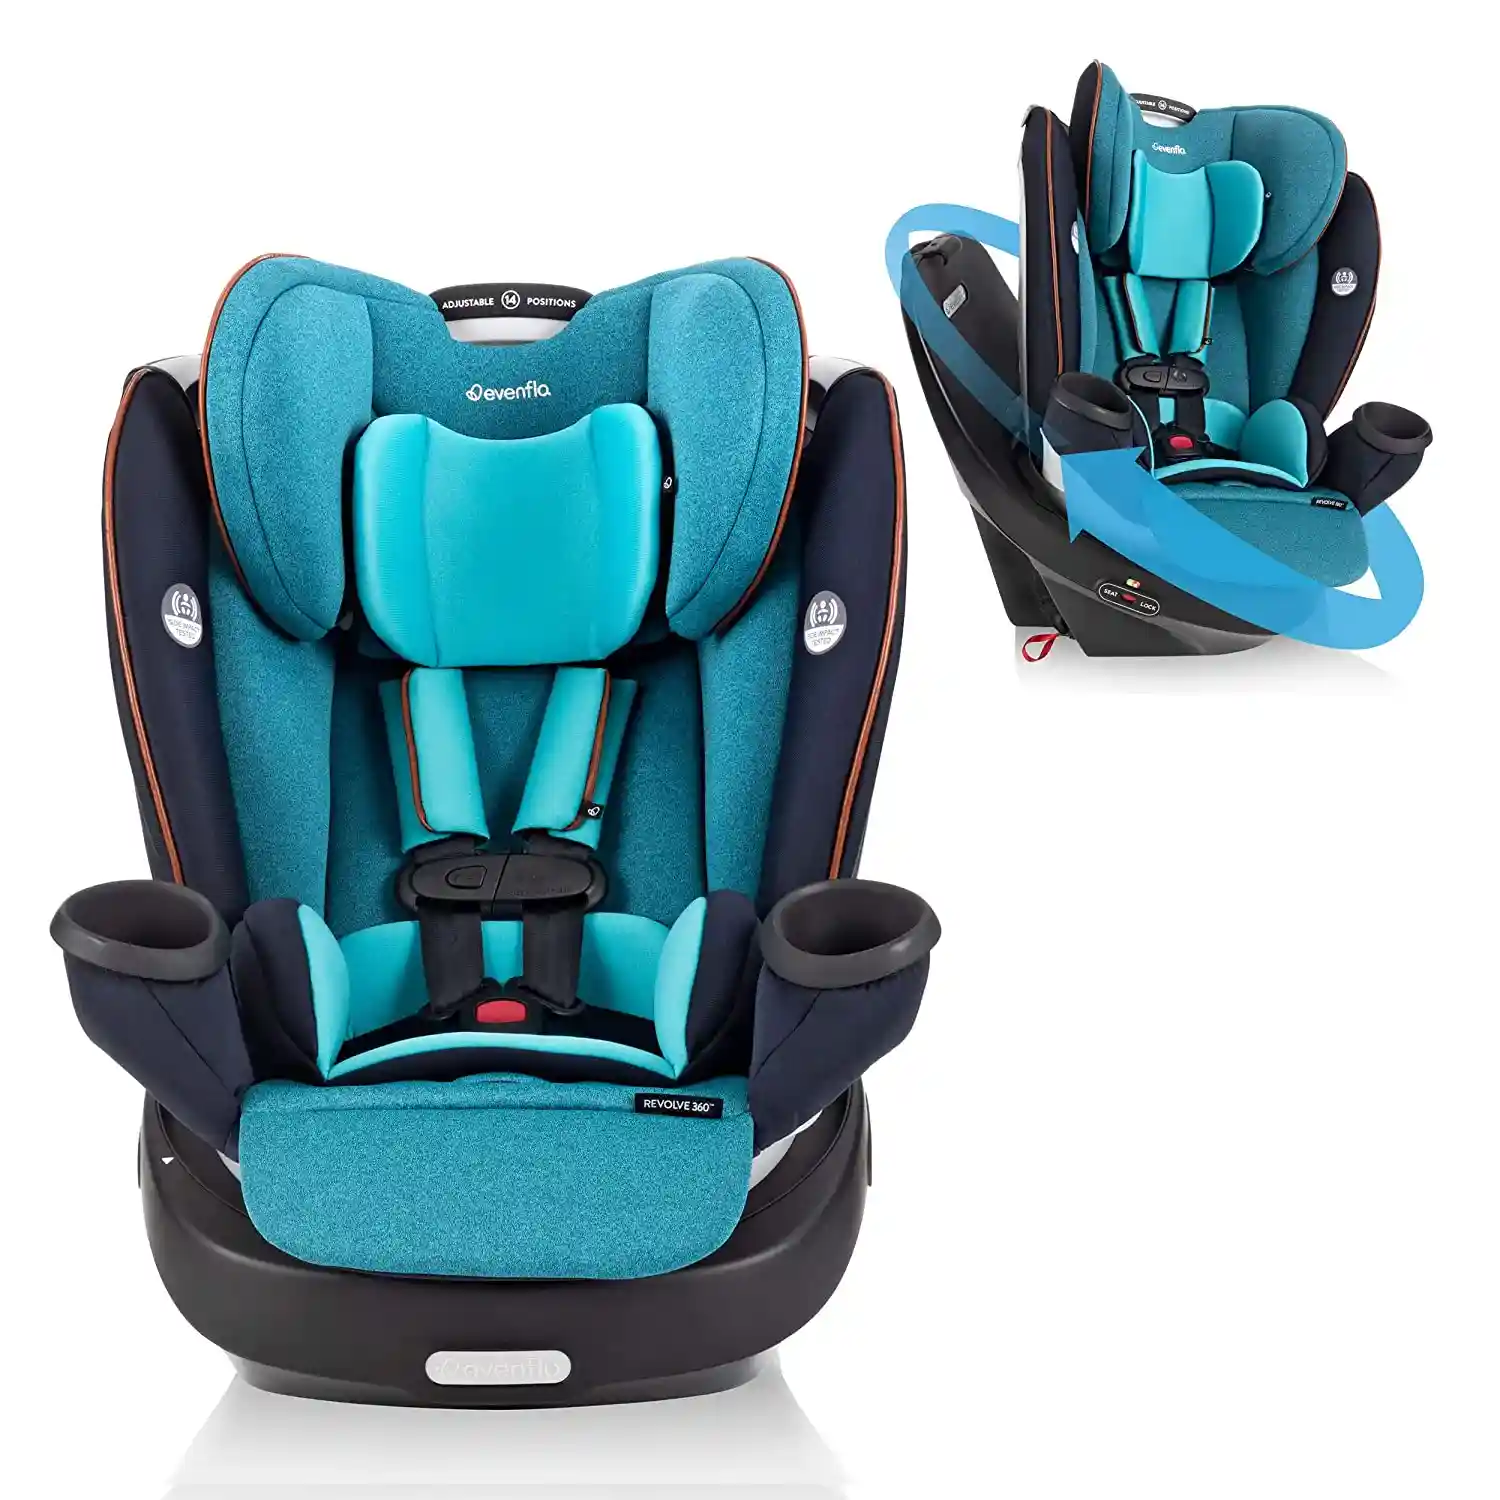 Evenflo Gold Revolve360 All-In-One Rotational Car Seat 